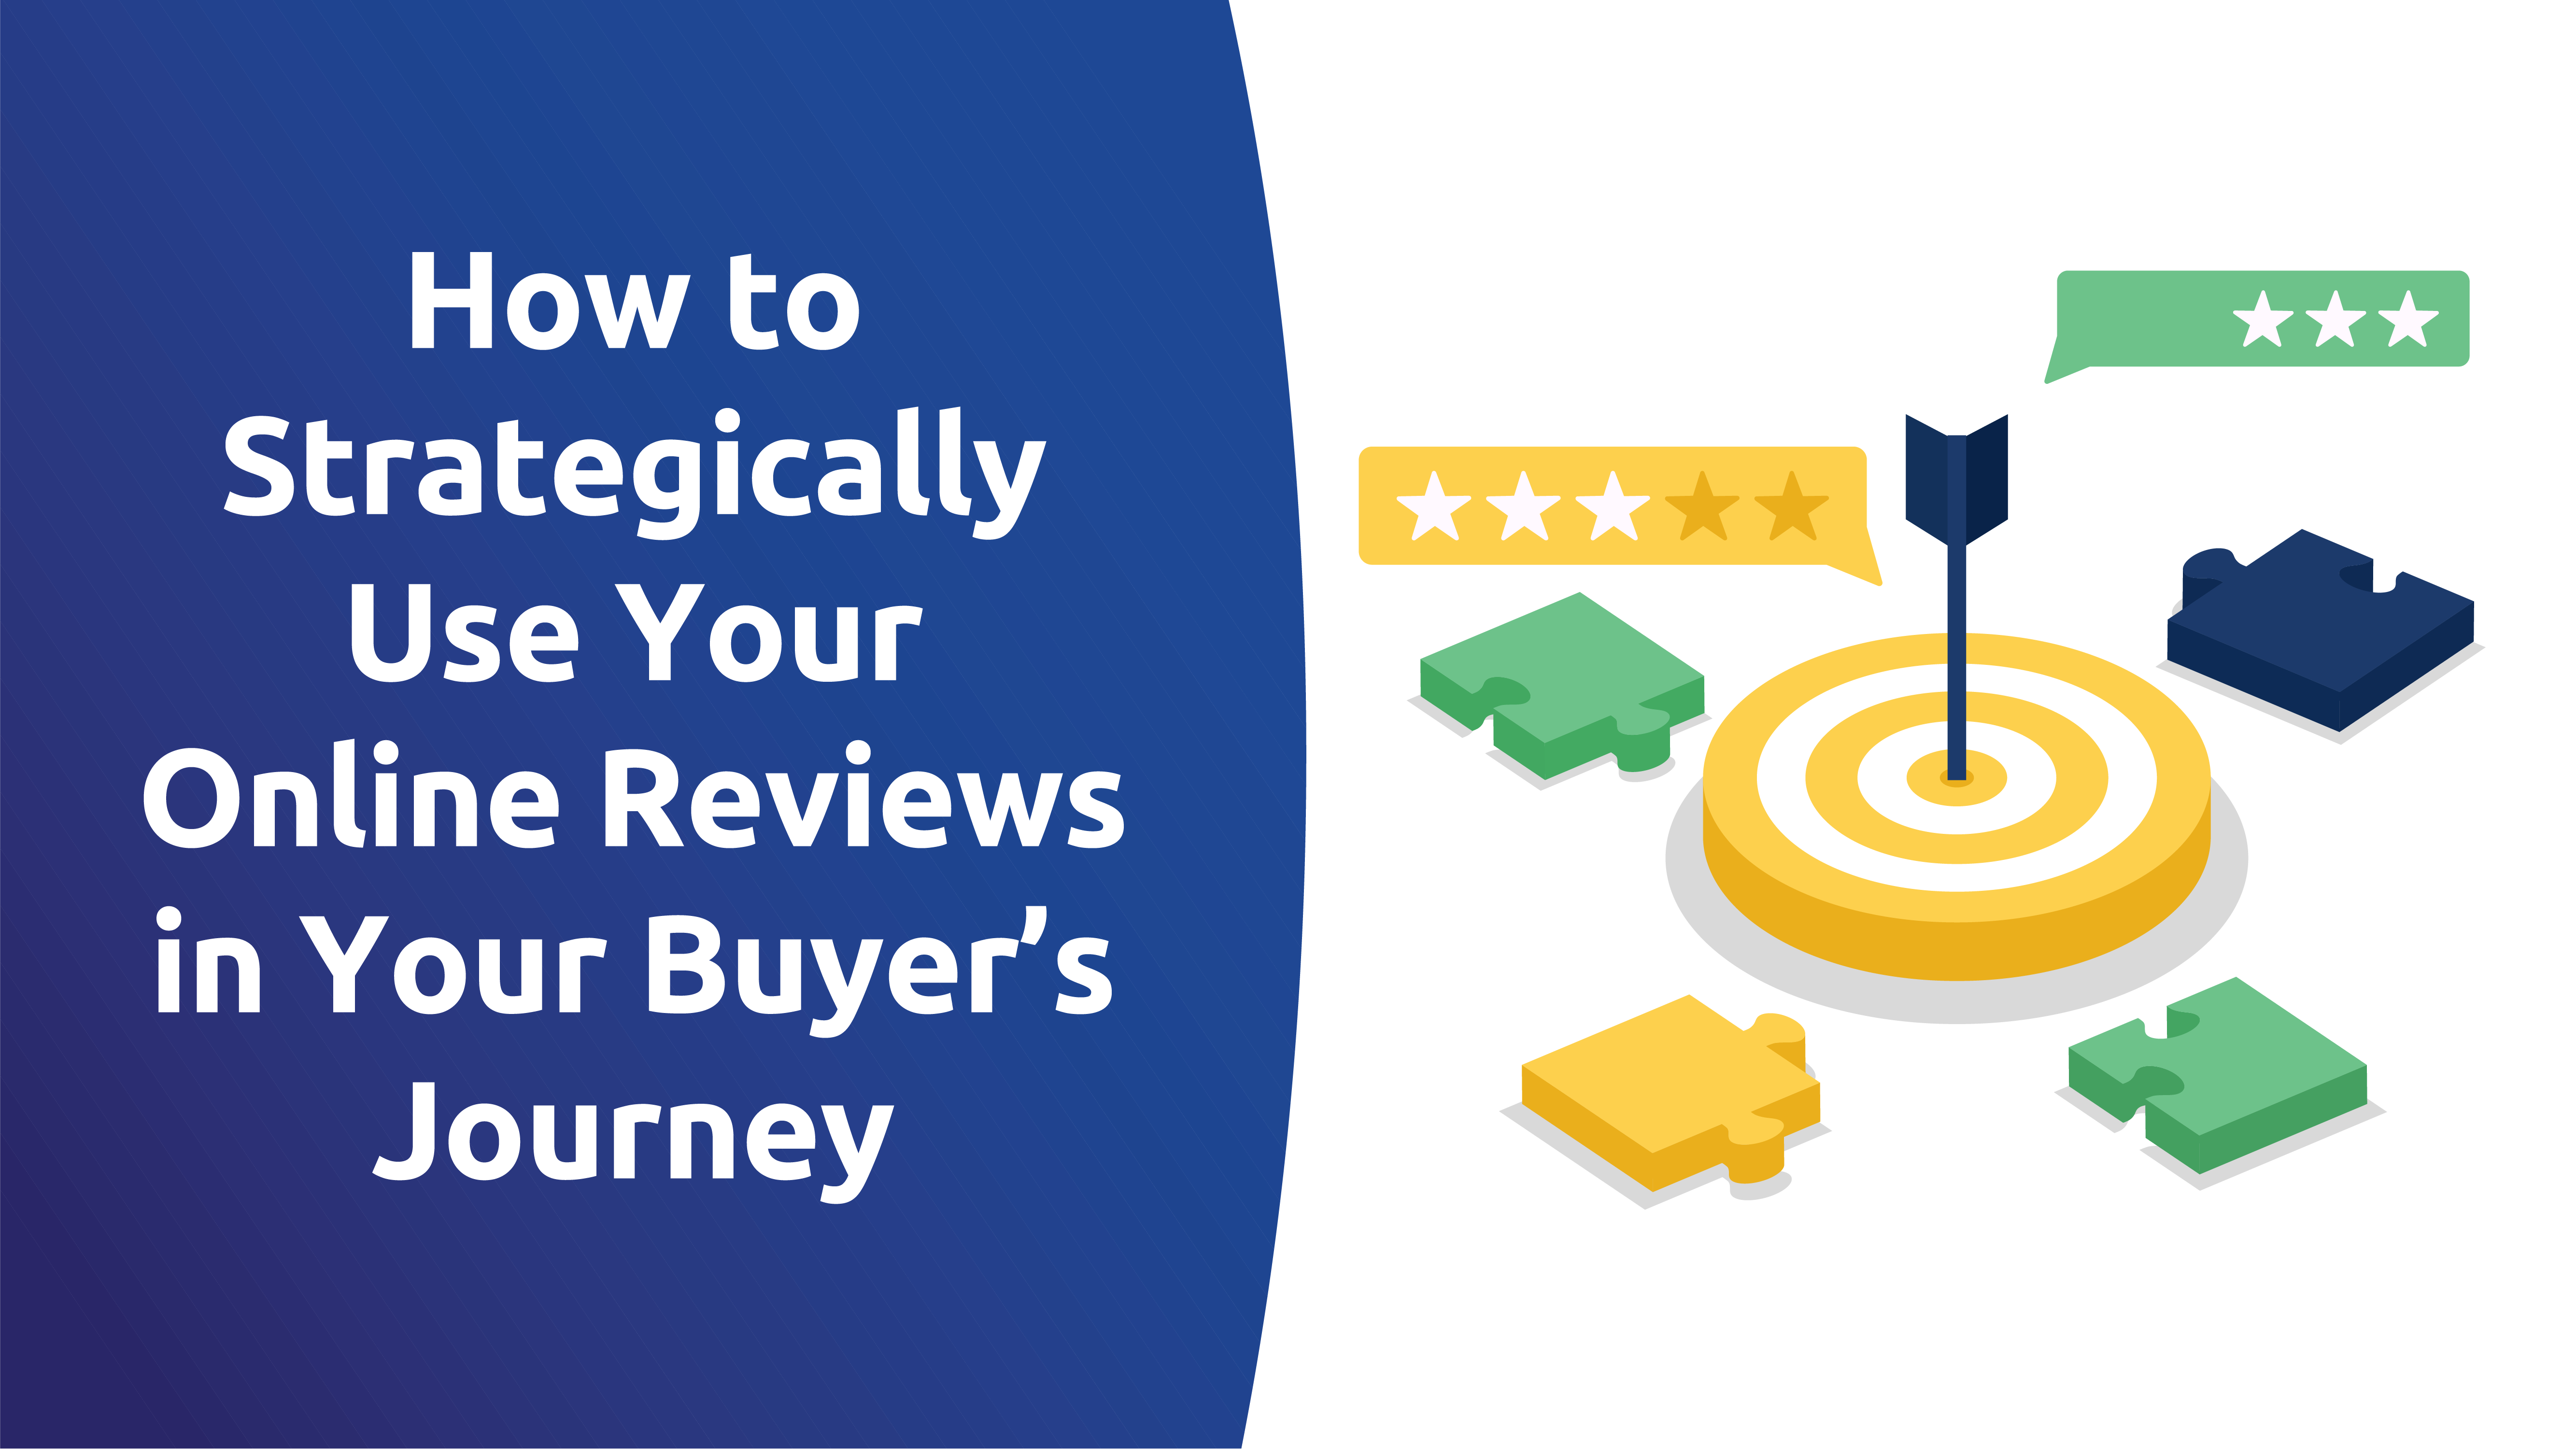 How To Strategically Use Your Online Reviews in Your Buyer’s Journey